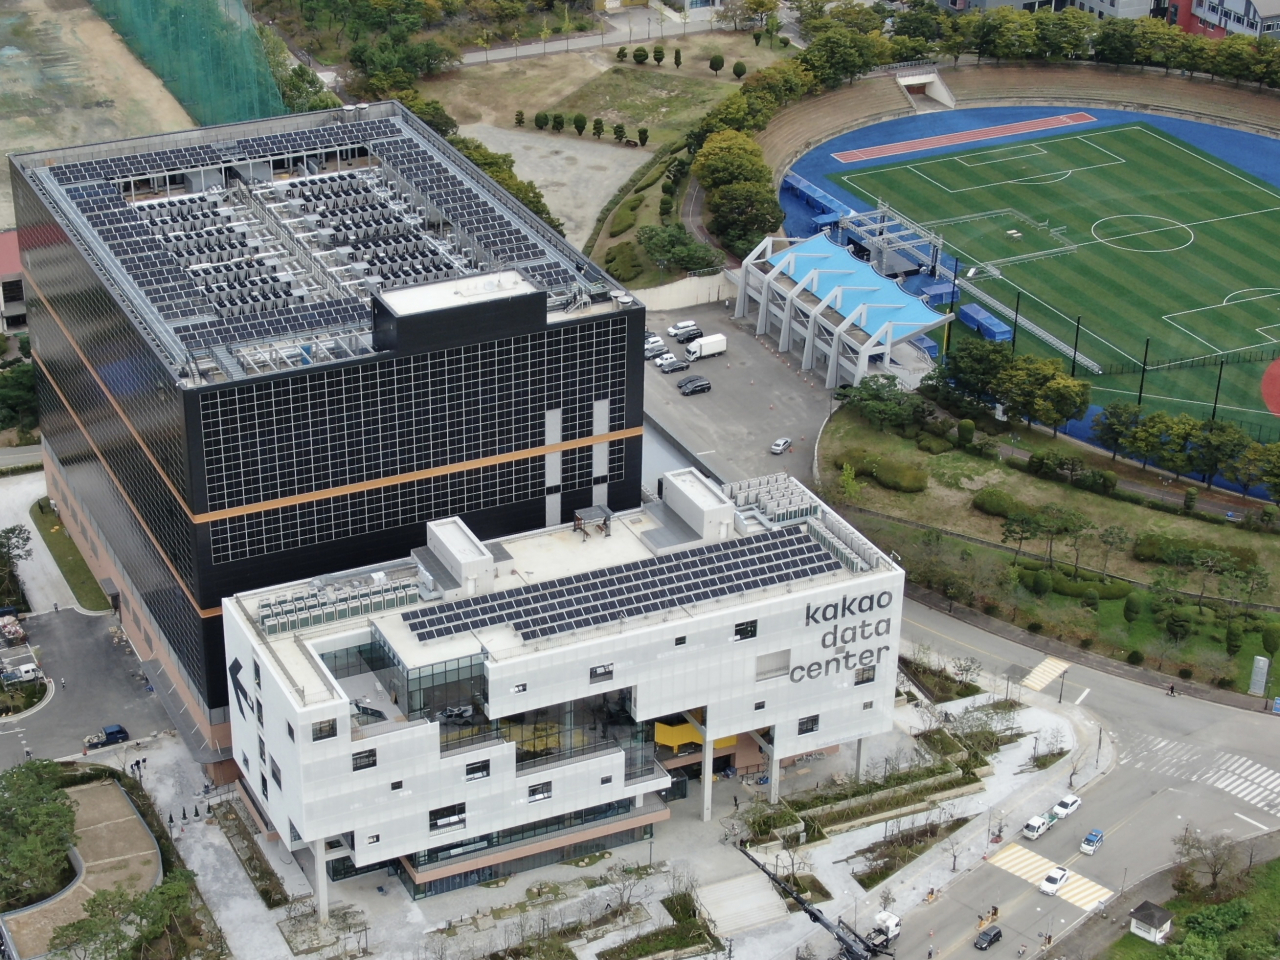 Kakao Data Center Ansan, the company's first in-house data facility, stands within the premises of Hanyang University's ERICA campus in Ansan, Gyeonggi Province. (Kakao)